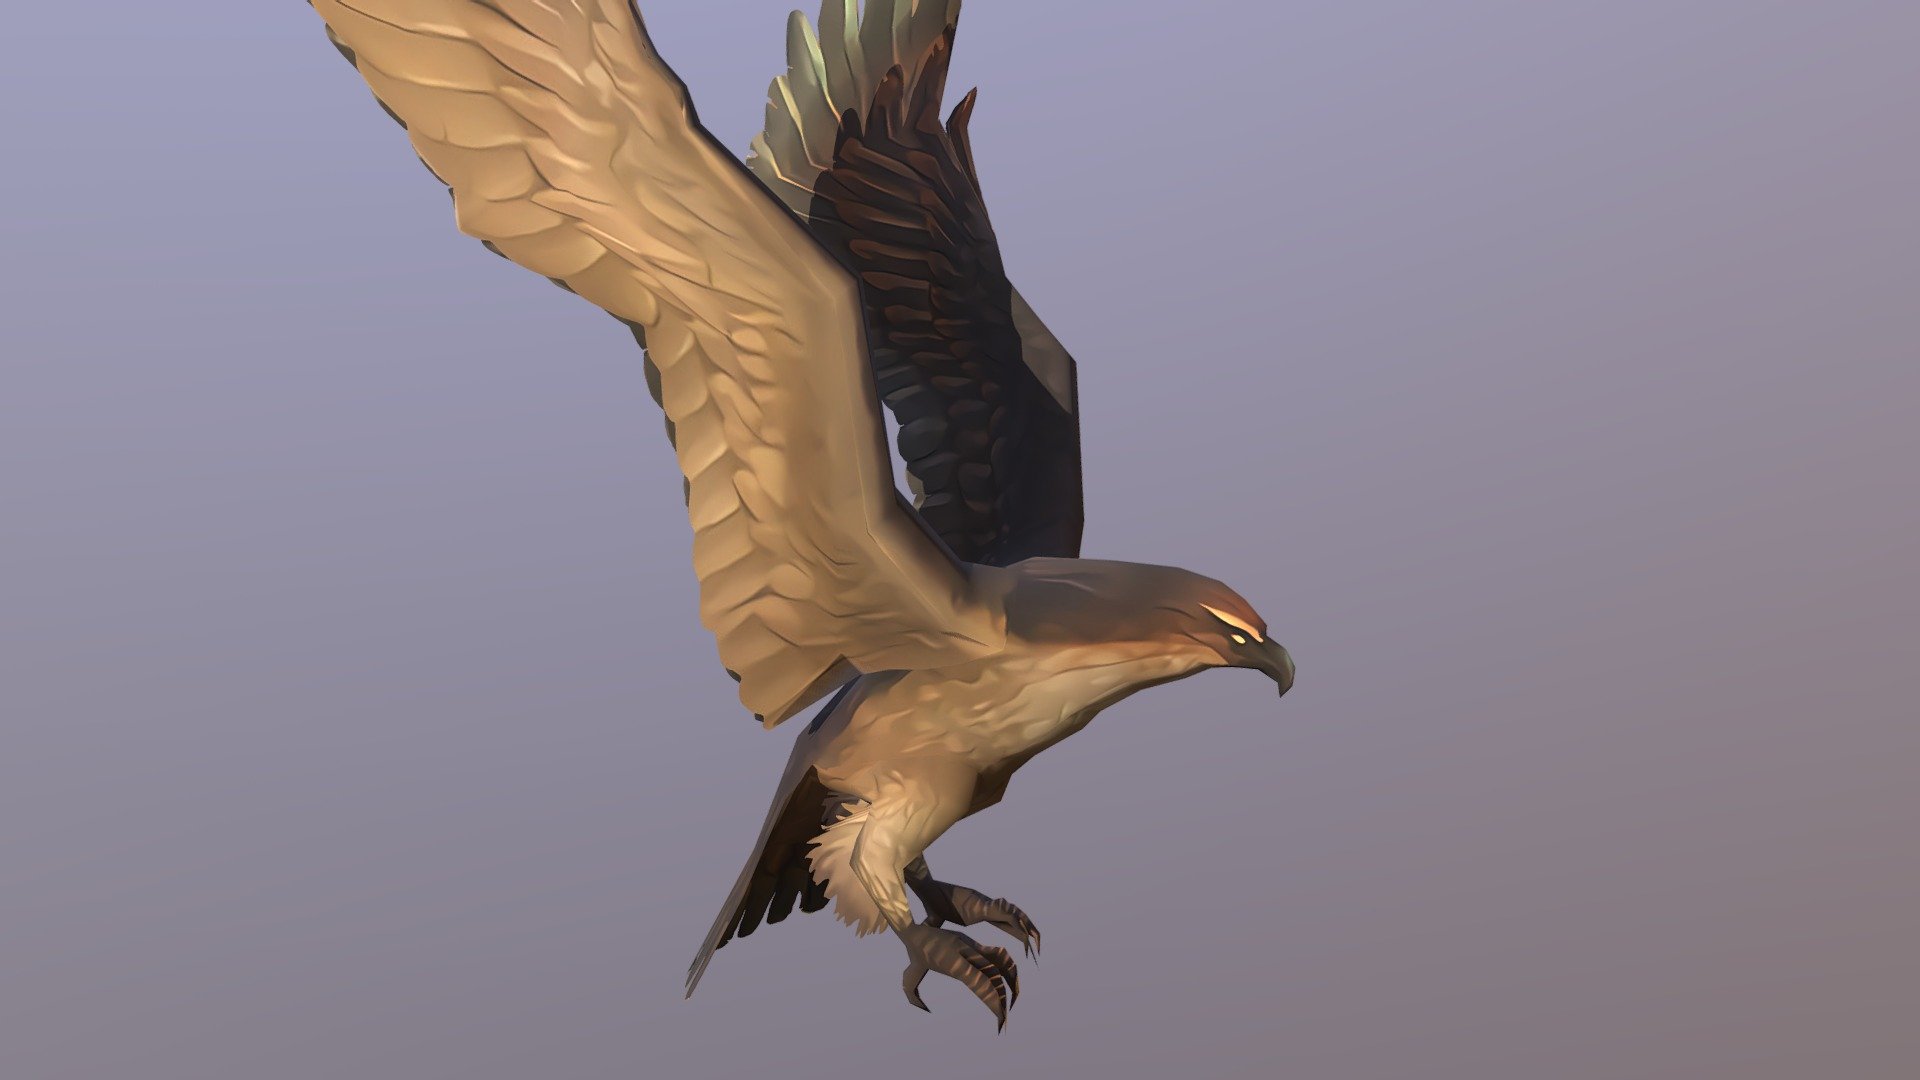 A Cartoon Bird Eagle Hawk Asset.

The 3d file format is FBX.

INSIDE:

FBX Model. FBX Animation. Albedo Texture. 1024x1024 resolution.
Animations: Attack1, Attack2, Die1, Die2, Fly, Gliding, Hit1, Hit2, HIt3, Idle - Cartoon Bird Eagle Hawk - Buy Royalty Free 3D model by Fubbi (@electricToy) 3d model